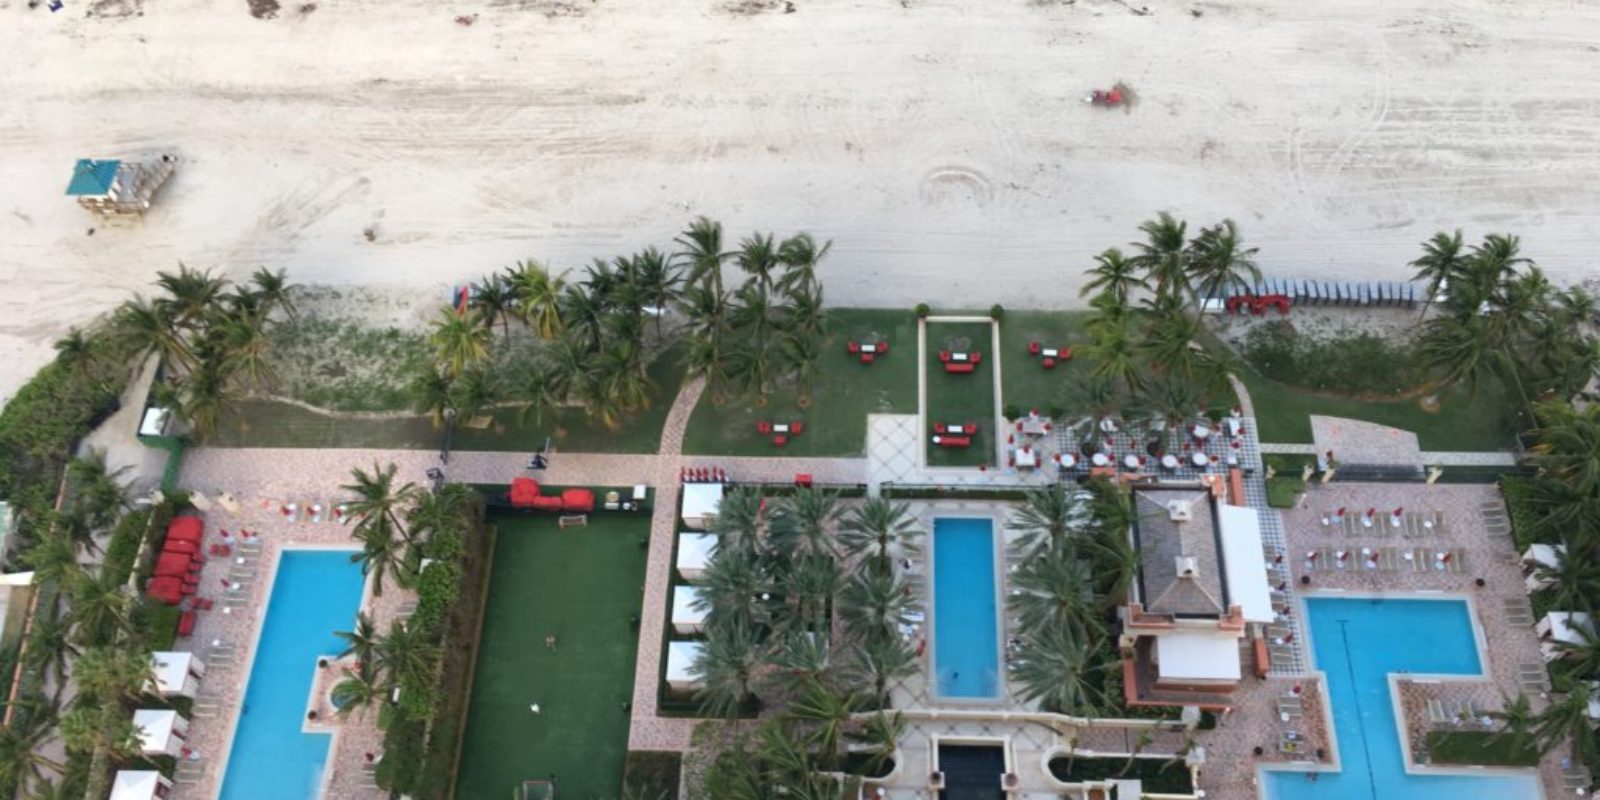 Acqualina Resort and Spa, in Sunny Isles, Florida, is a great family destination. It's the only property in the Miami/Fort Lauderdale area with pure, uninterrupted access to the beach!